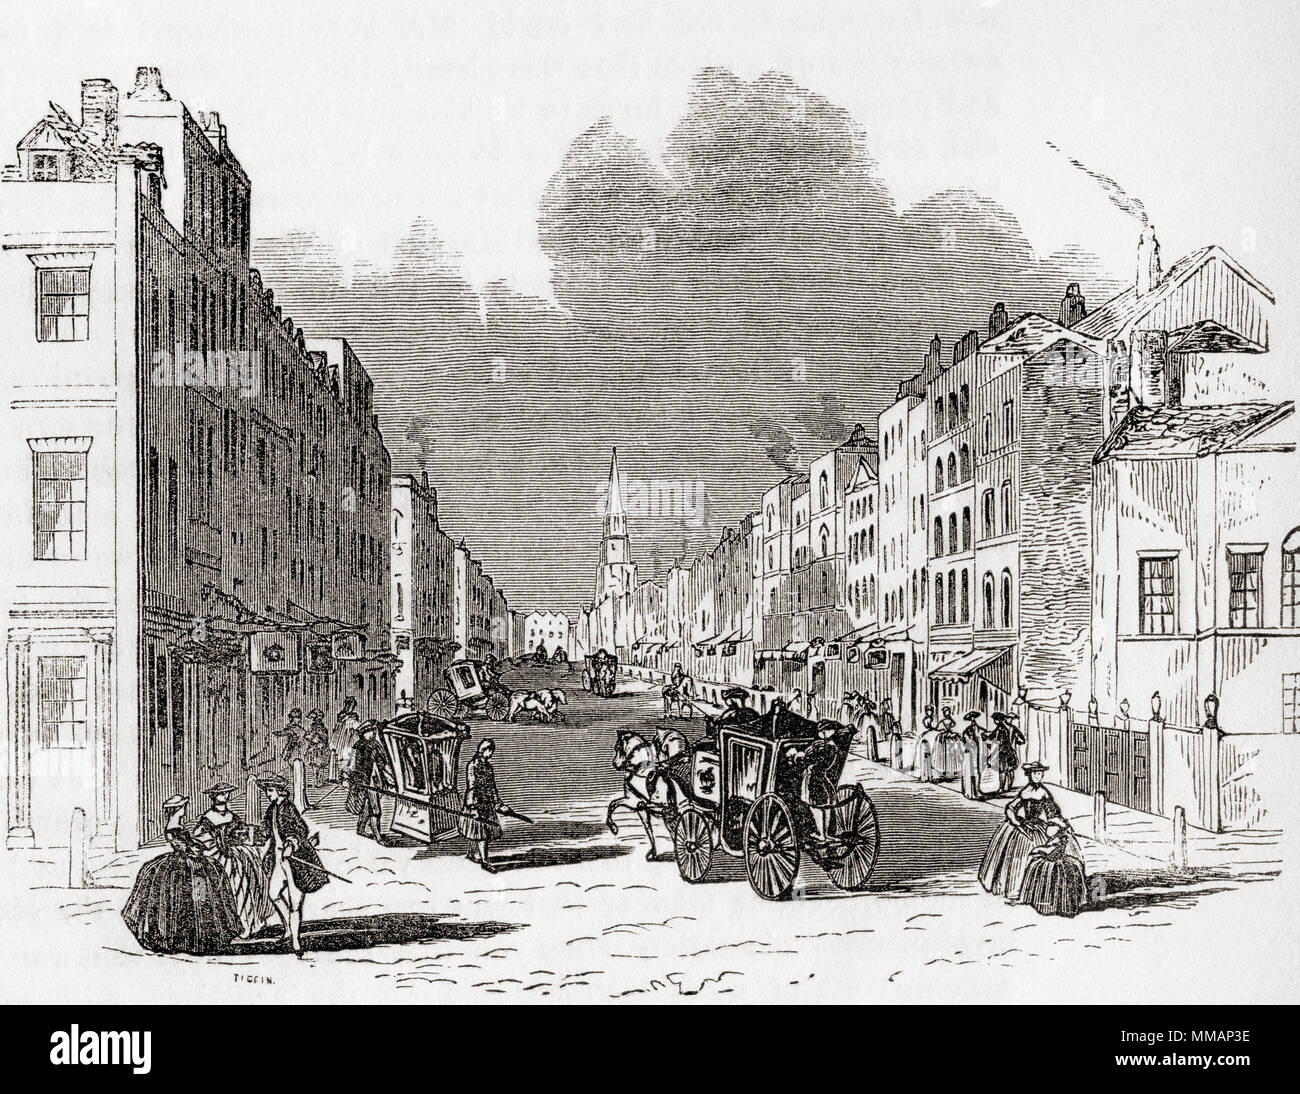 Pall Mall, City of Westminster, London, England seen here c.1740.  From Old England: A Pictorial Museum, published 1847. Stock Photo